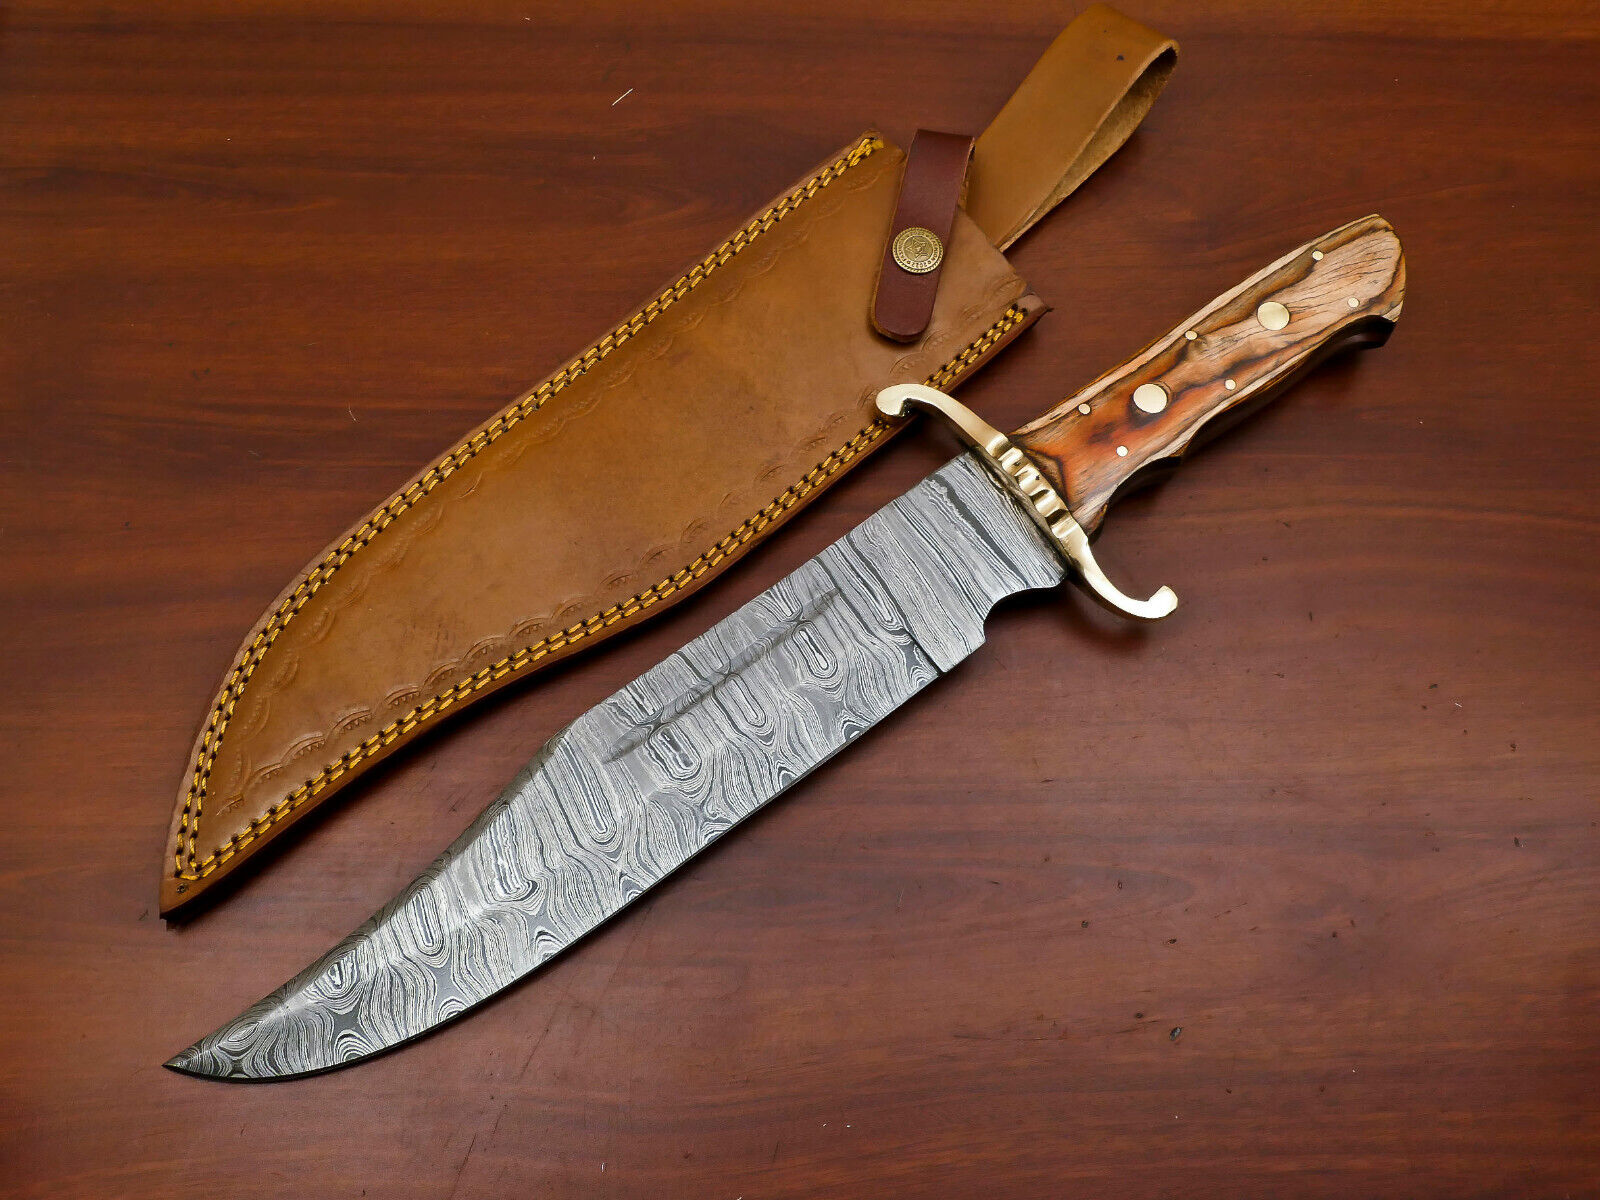 CUSTOM HAND FORGED DAMASCUS STEEL FIXED BLADE FULL TANG BOWIE HUNTING KNIFE